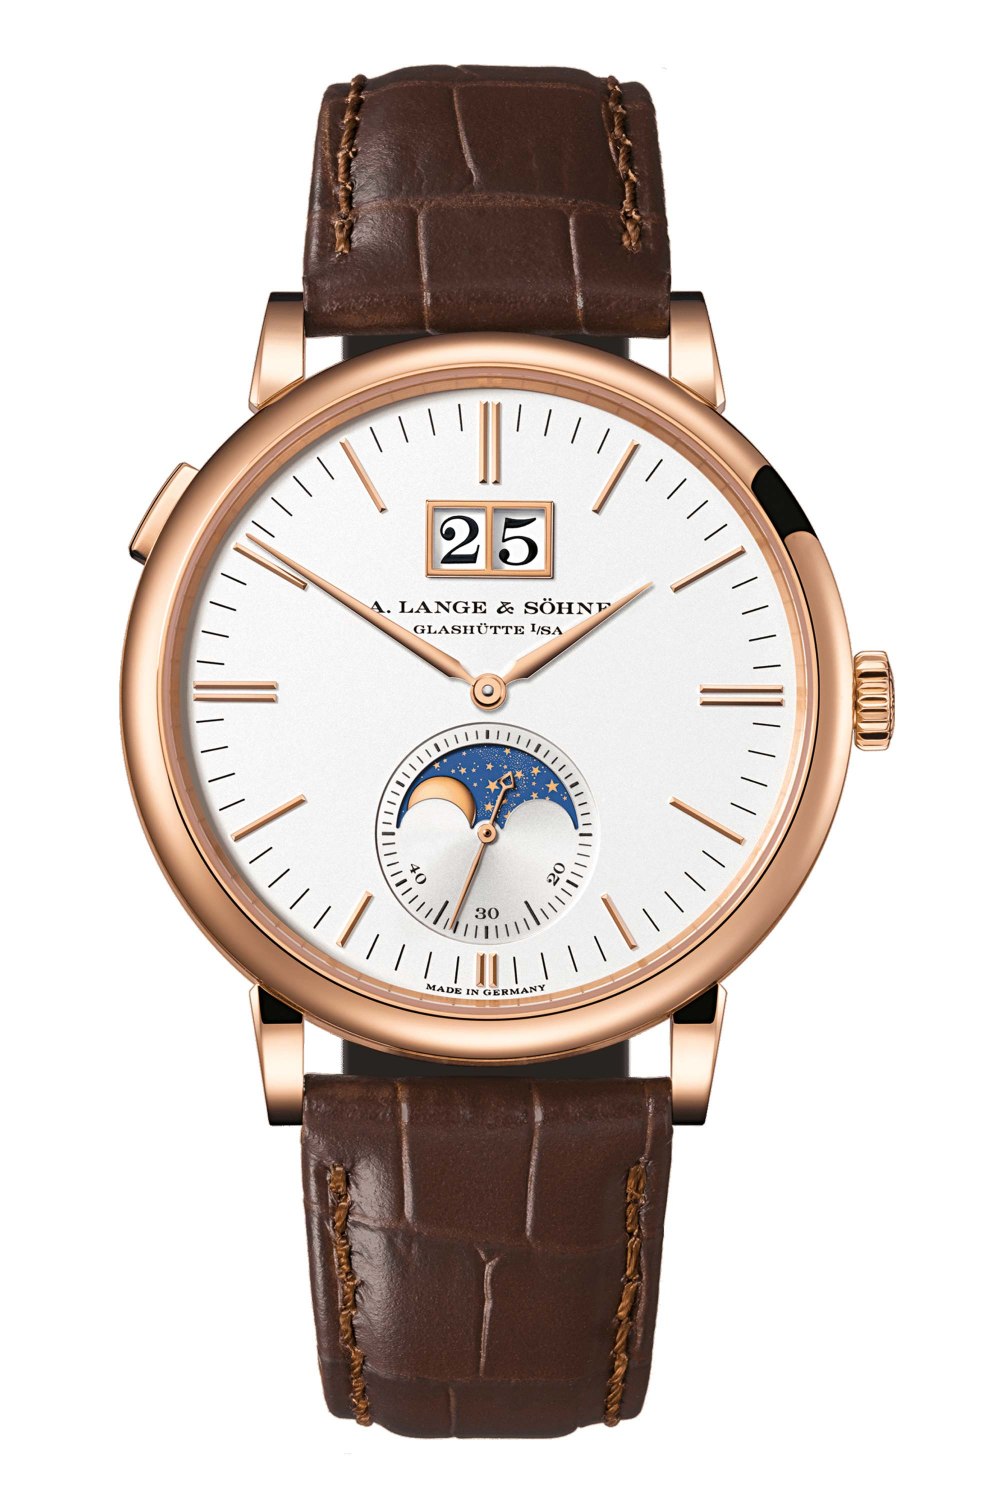 A. LANGE & SÖHNE Saxonia Outsize Date Rose Gold 384.032